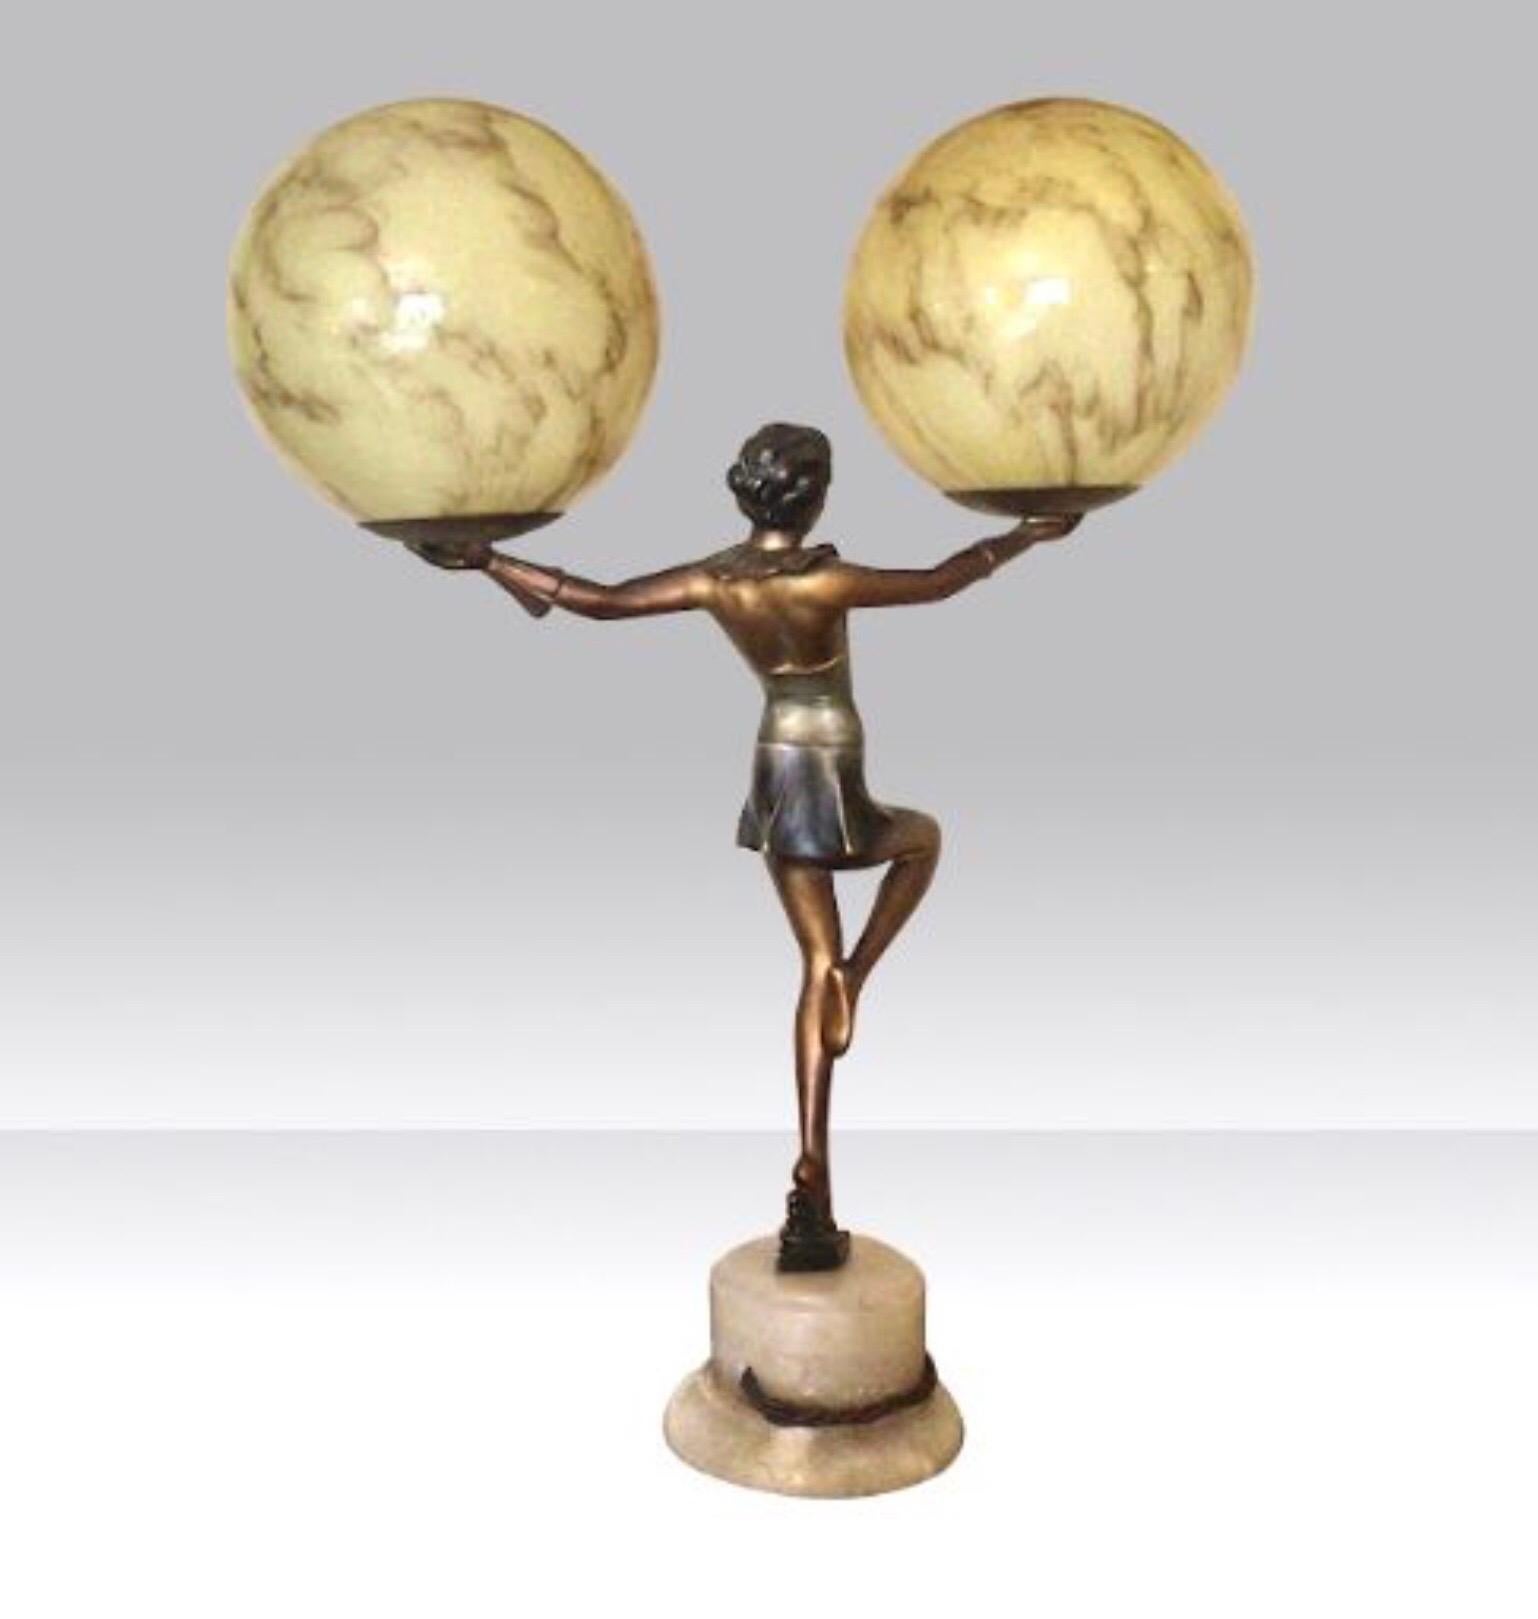 French Art Deco Lady Lamp Holding Aloft a Pair of Marbled Globes